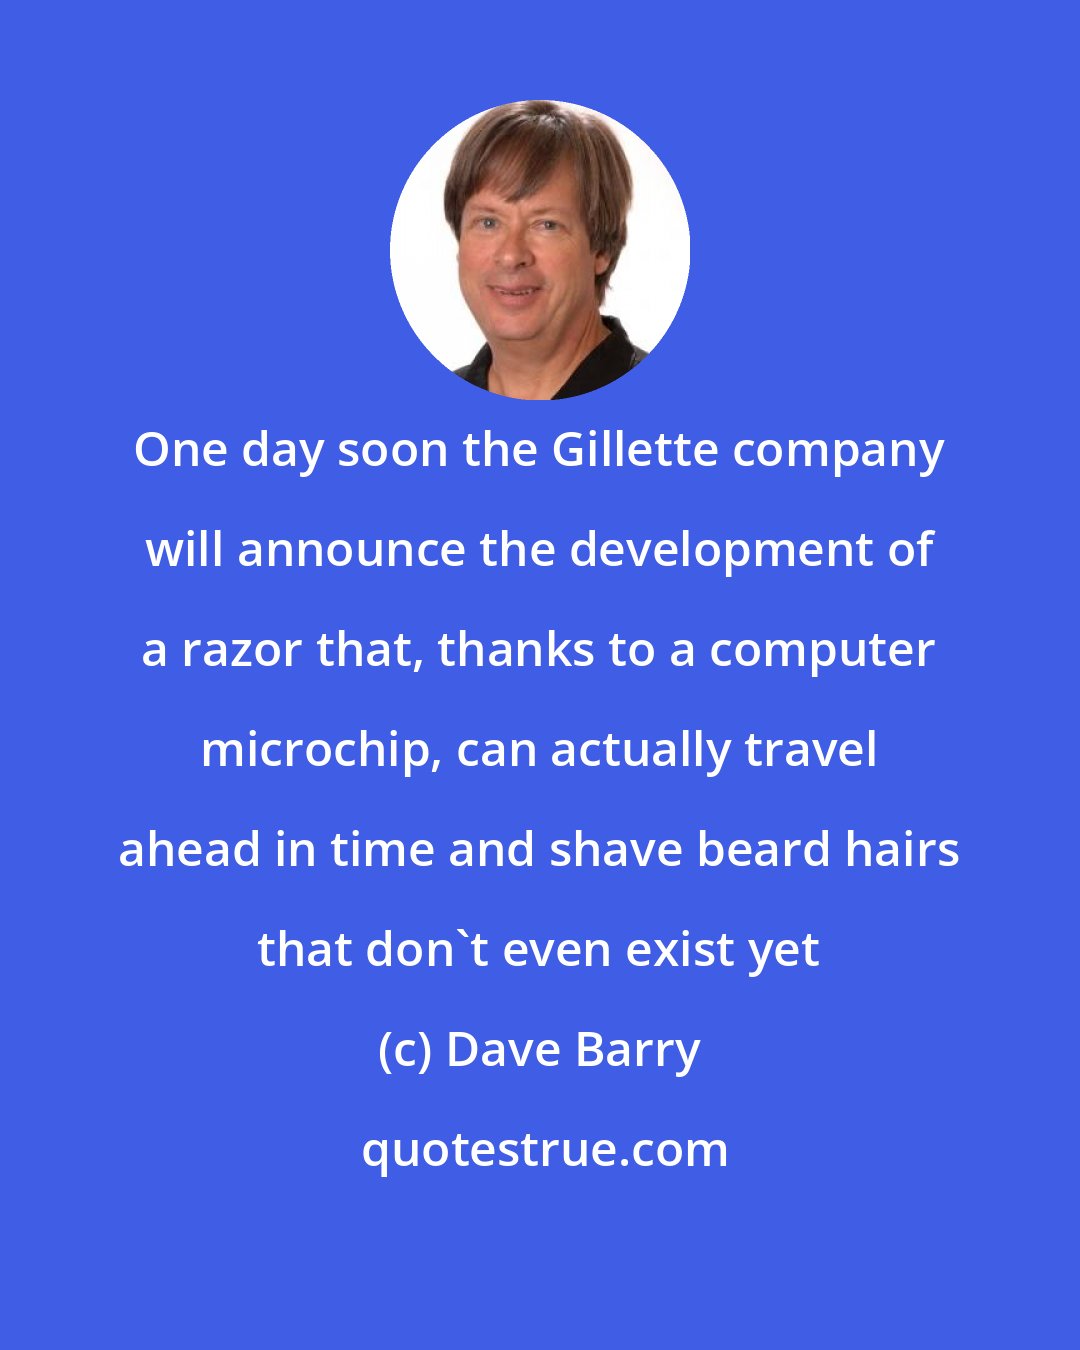 Dave Barry: One day soon the Gillette company will announce the development of a razor that, thanks to a computer microchip, can actually travel ahead in time and shave beard hairs that don't even exist yet